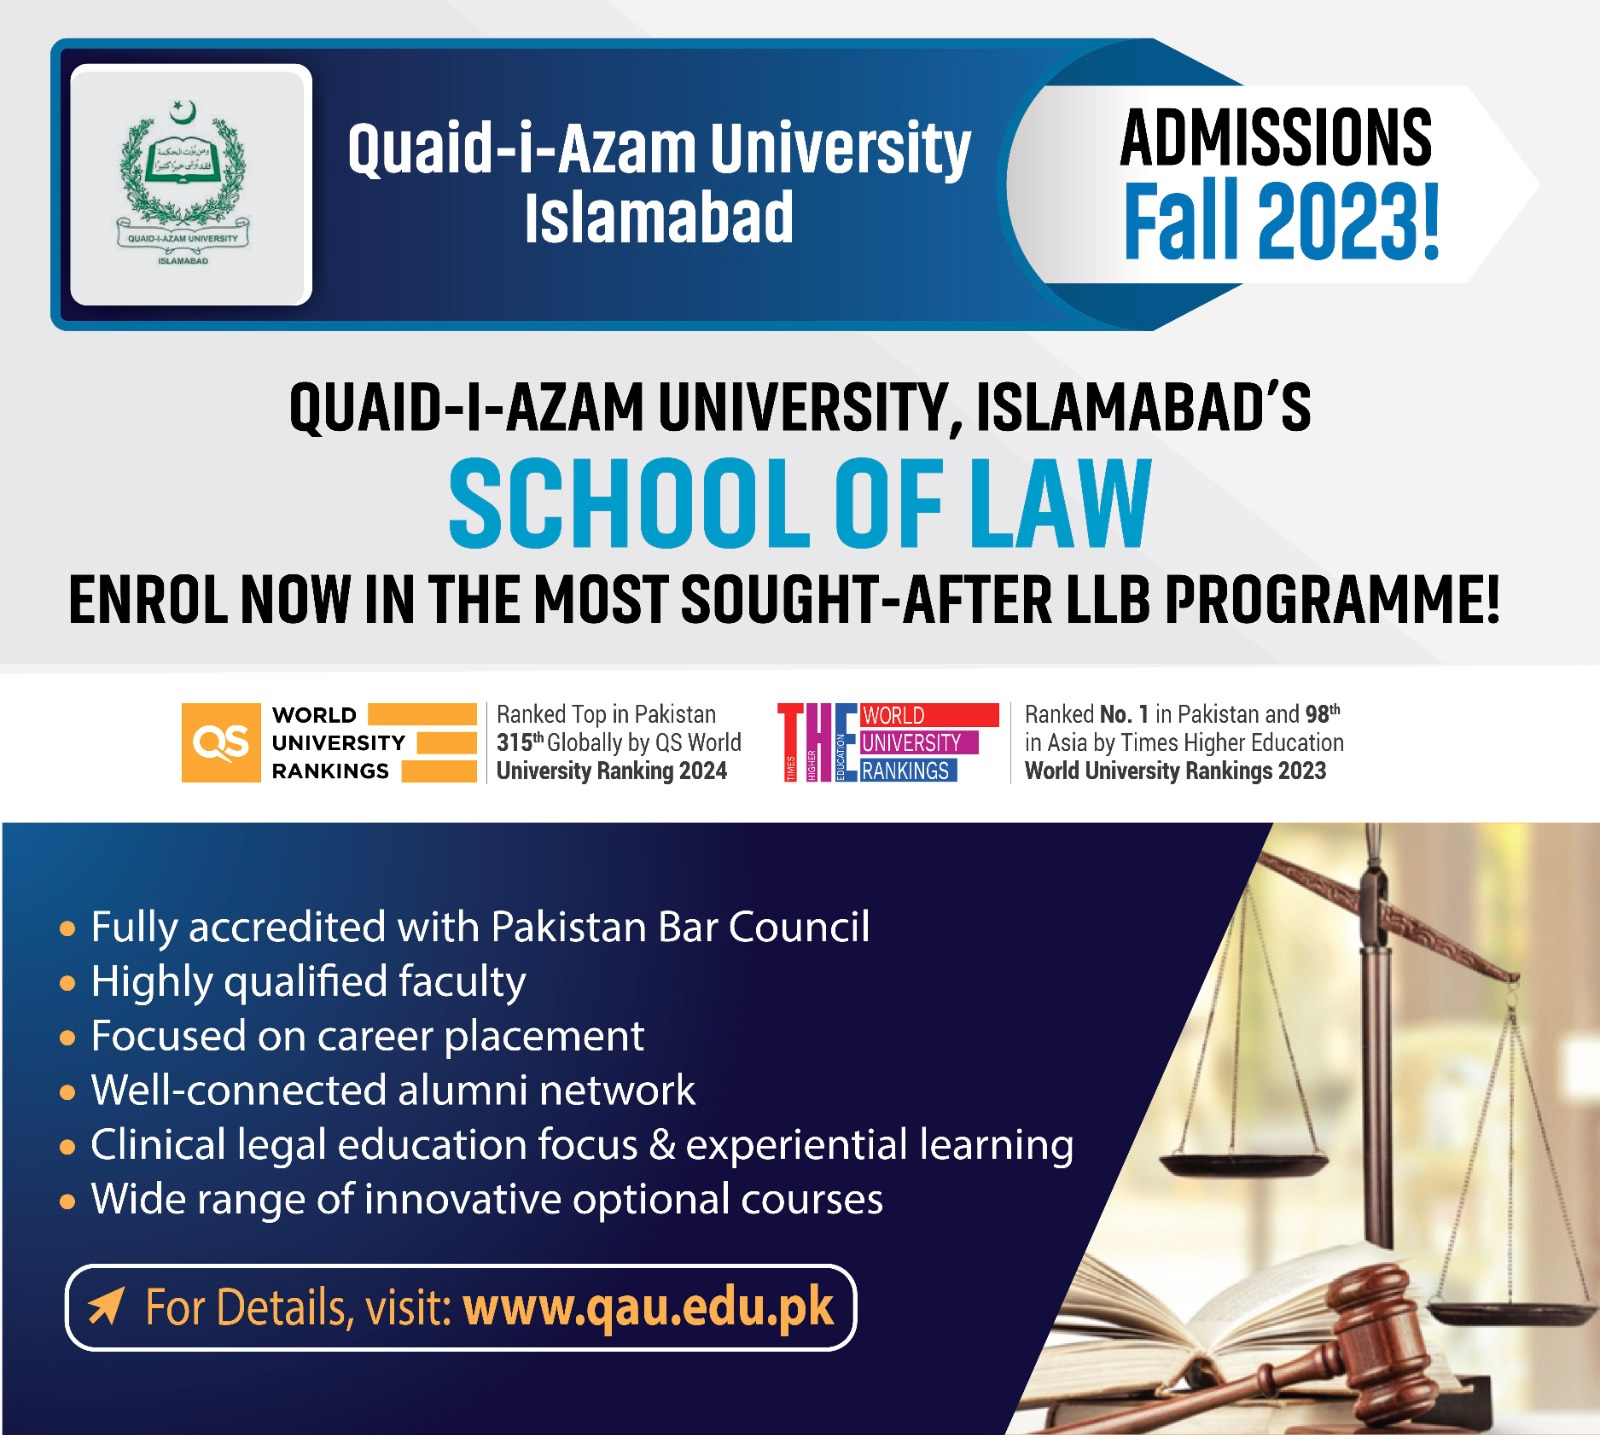 Admissions Open, Golden Opportunity to join one of the most sought-after BA/LL.B Programmes.